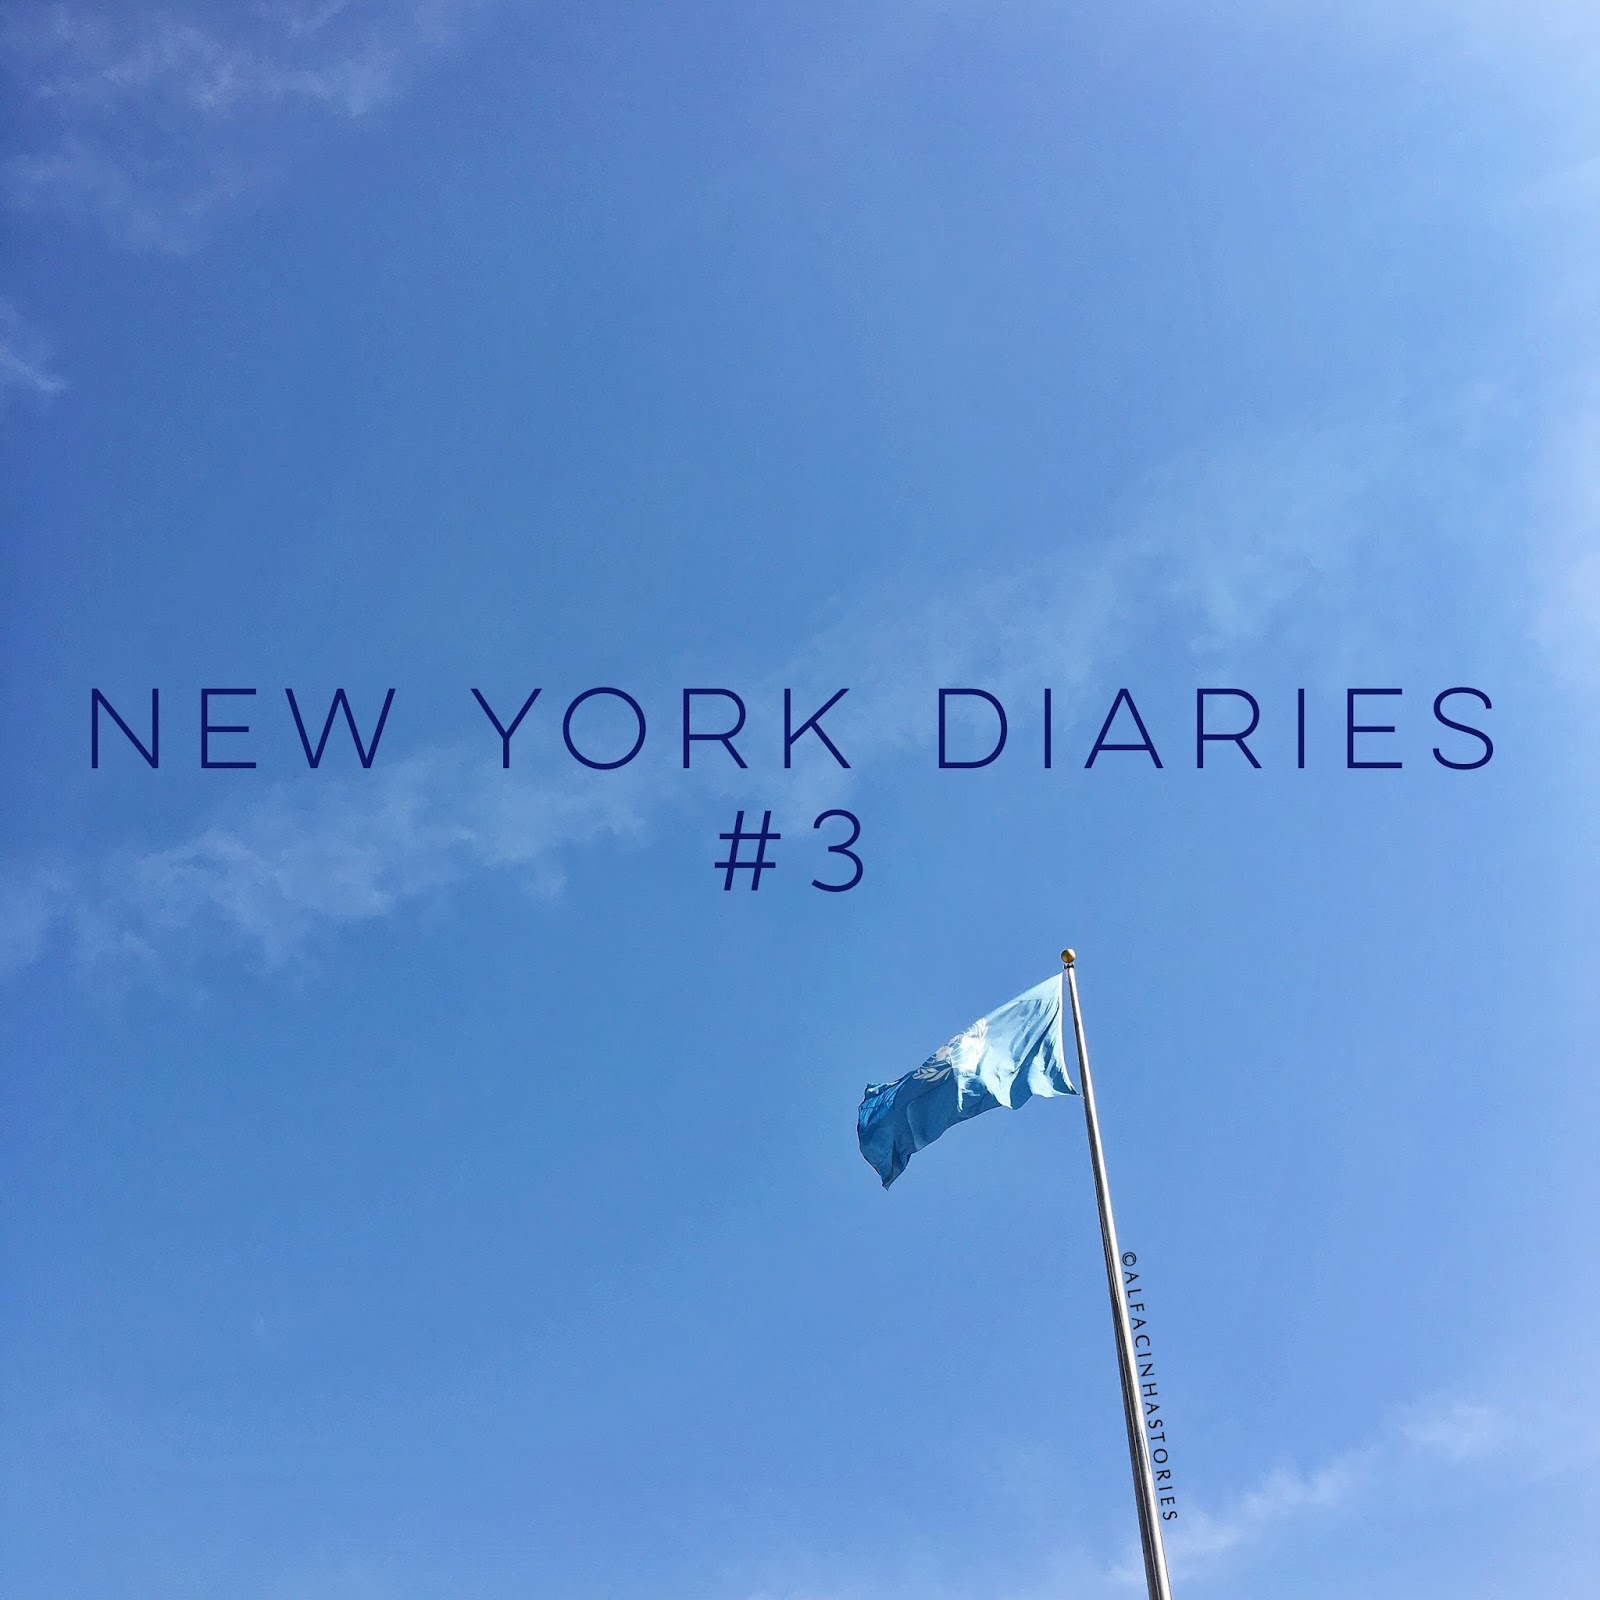 The New York Diaries #3